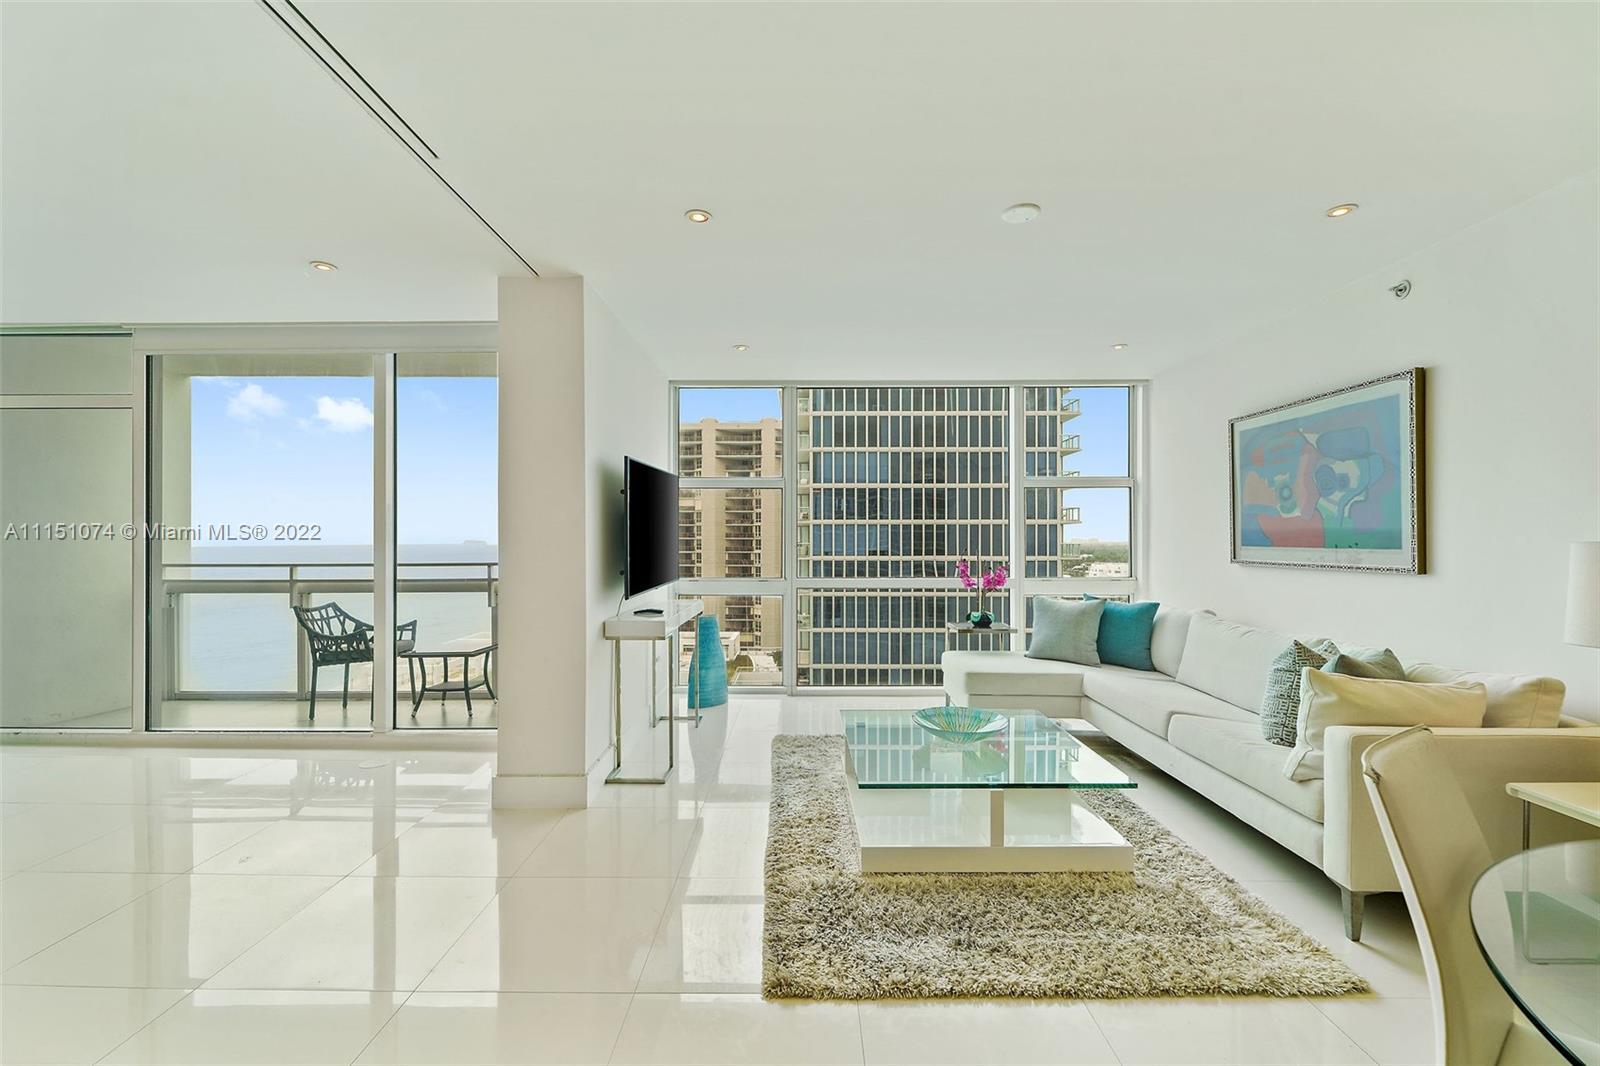 Unique two-bedroom unit at premiere ocean front luxurious Carillon Miami Wellness Resort with second